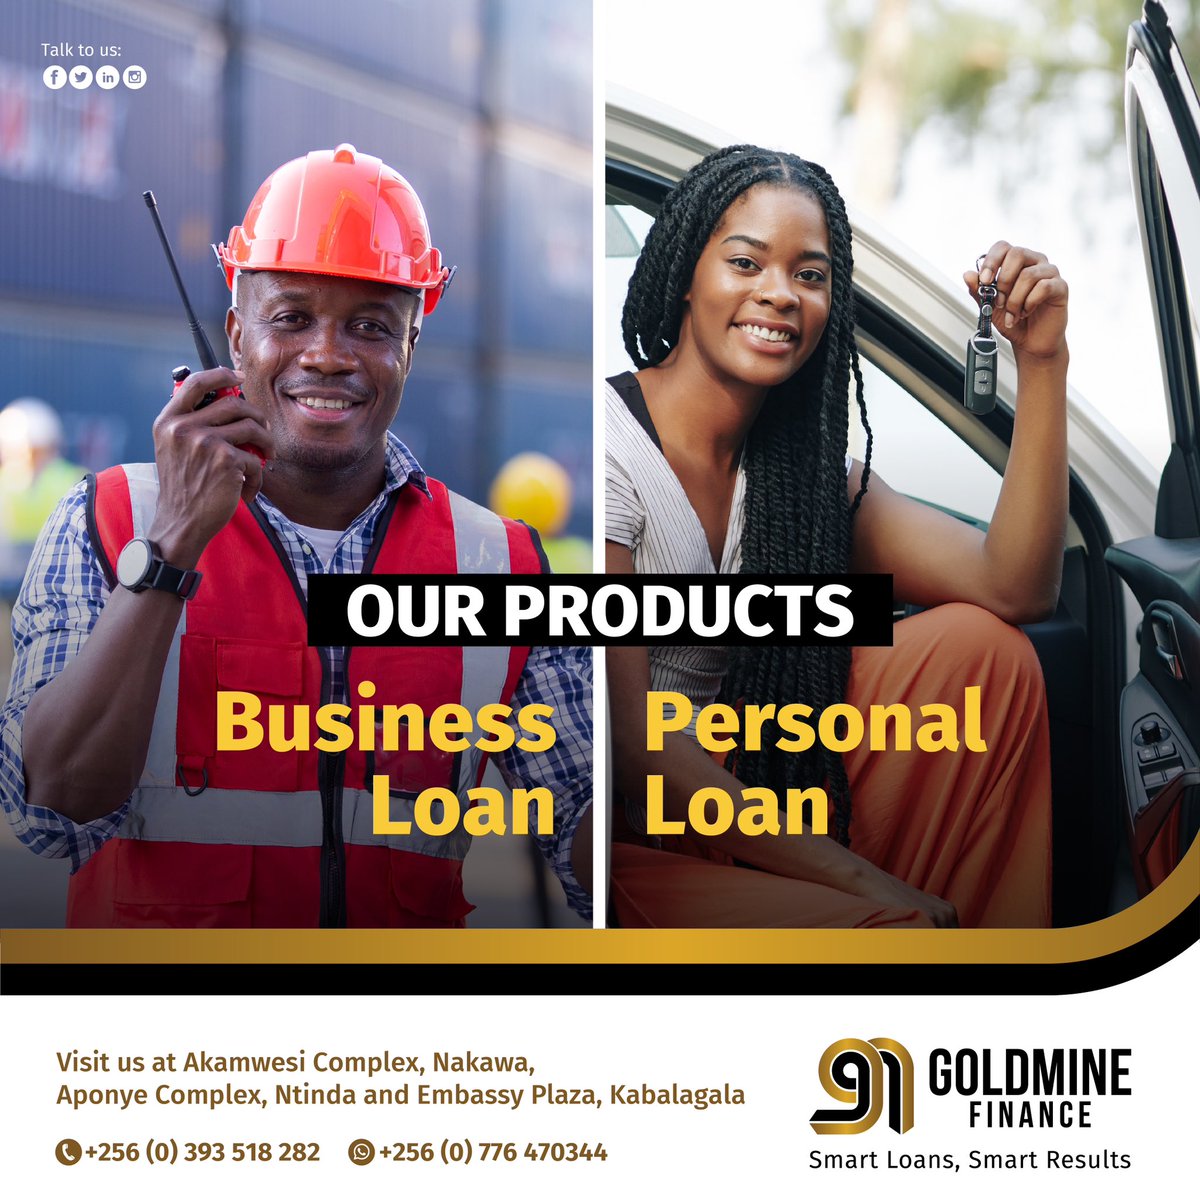 These are the loan products that we offer. Agency banking services are also available at our Nakawa branch. #GoldmineFinance #SmartLoansSmartResults